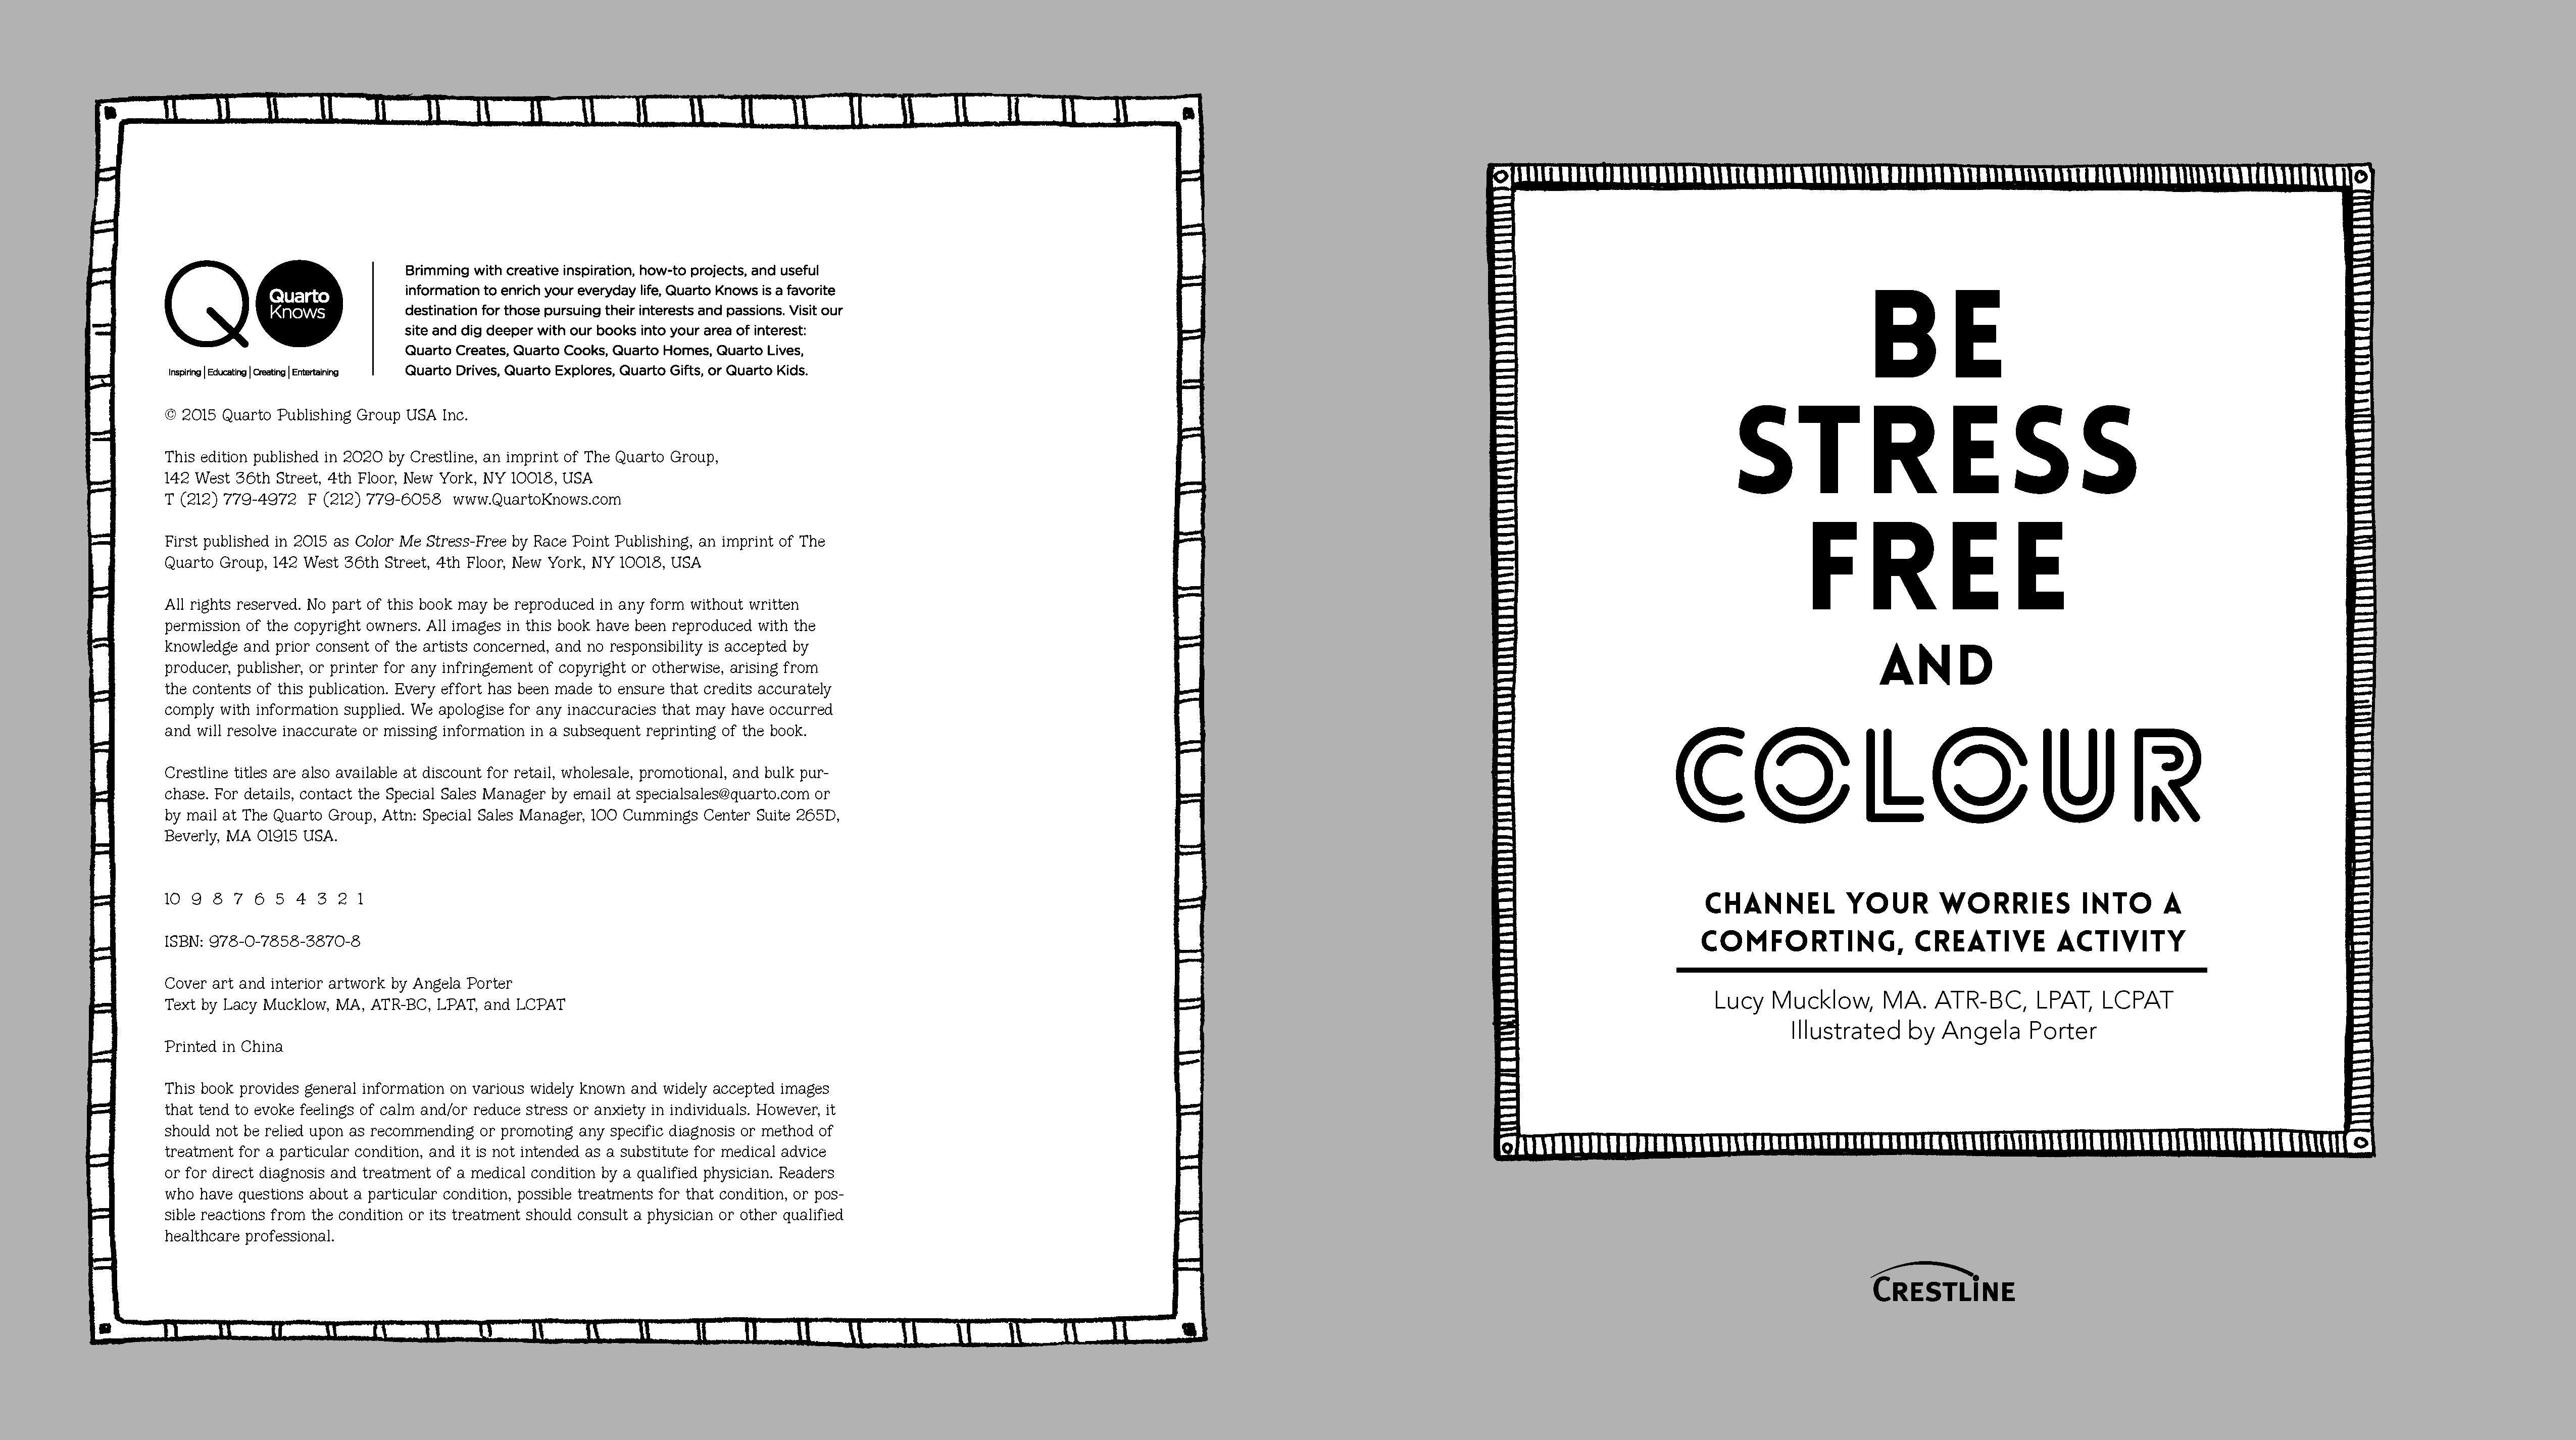 Be Stress-Free and Colour